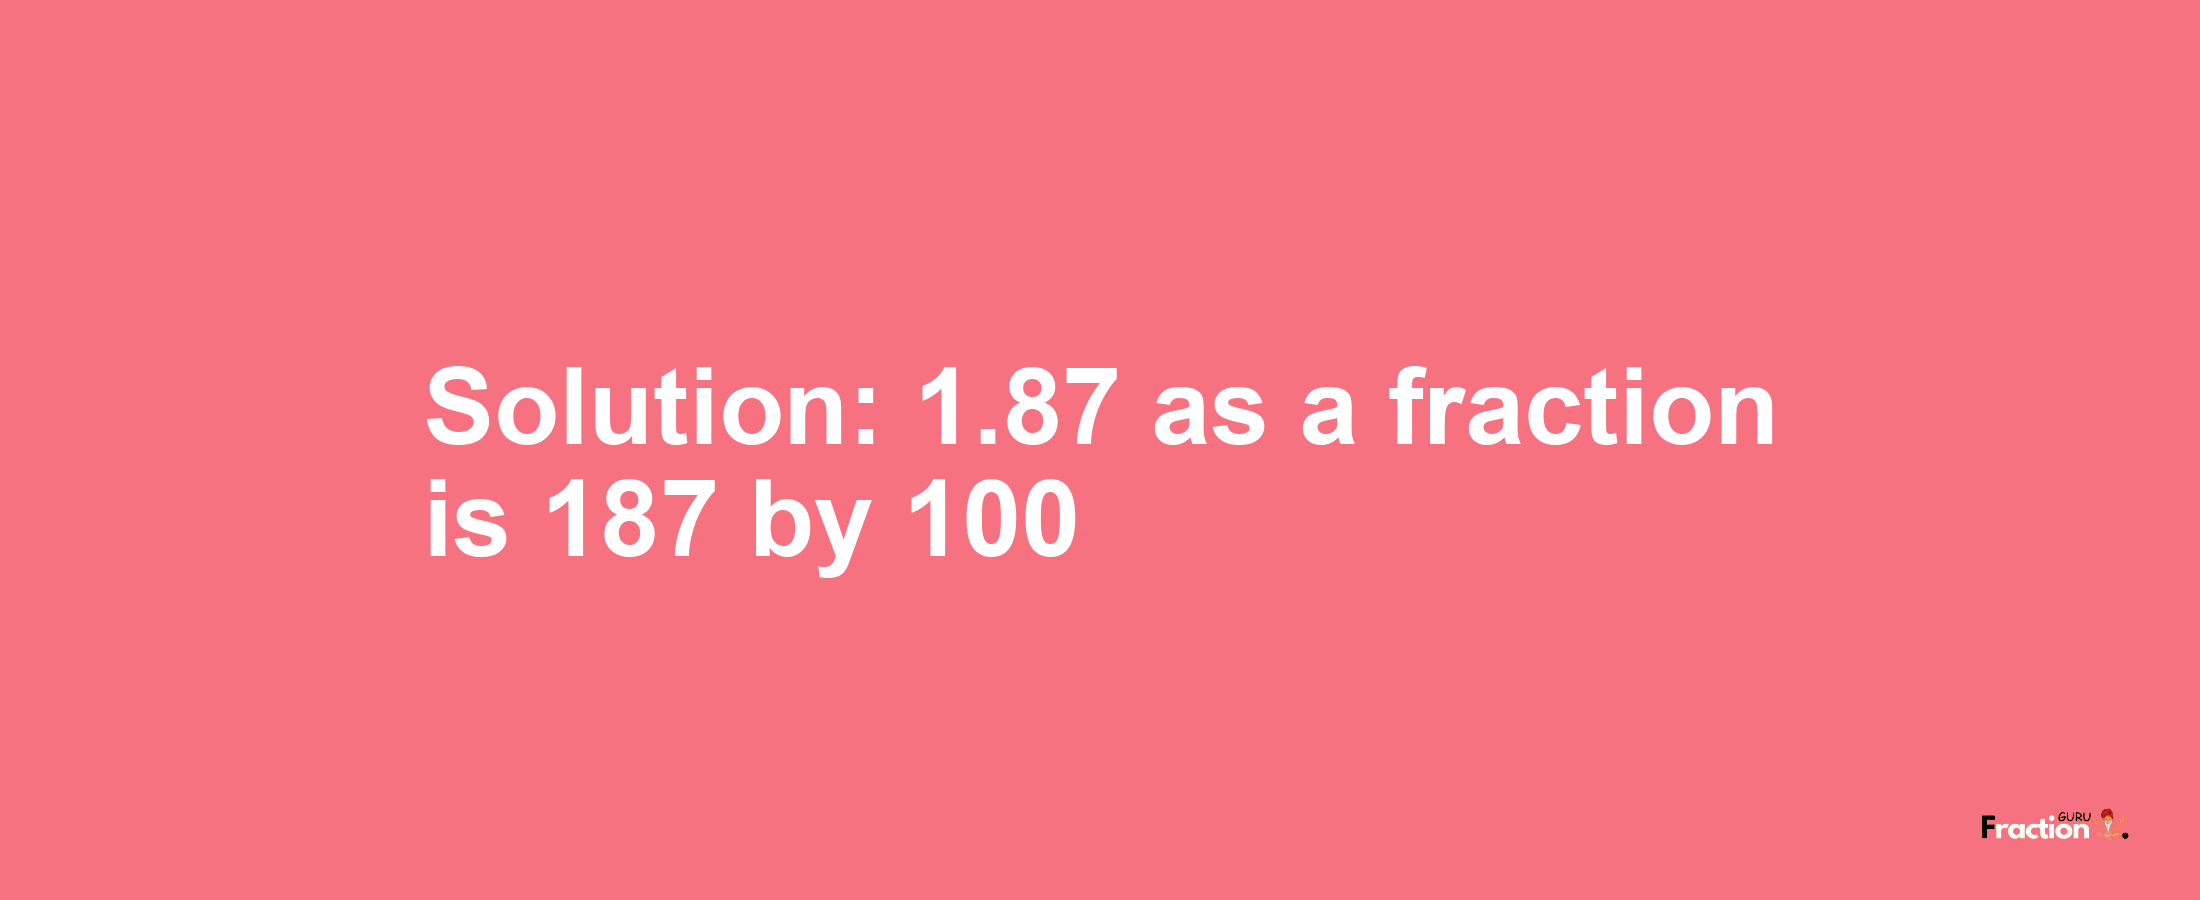 Solution:1.87 as a fraction is 187/100